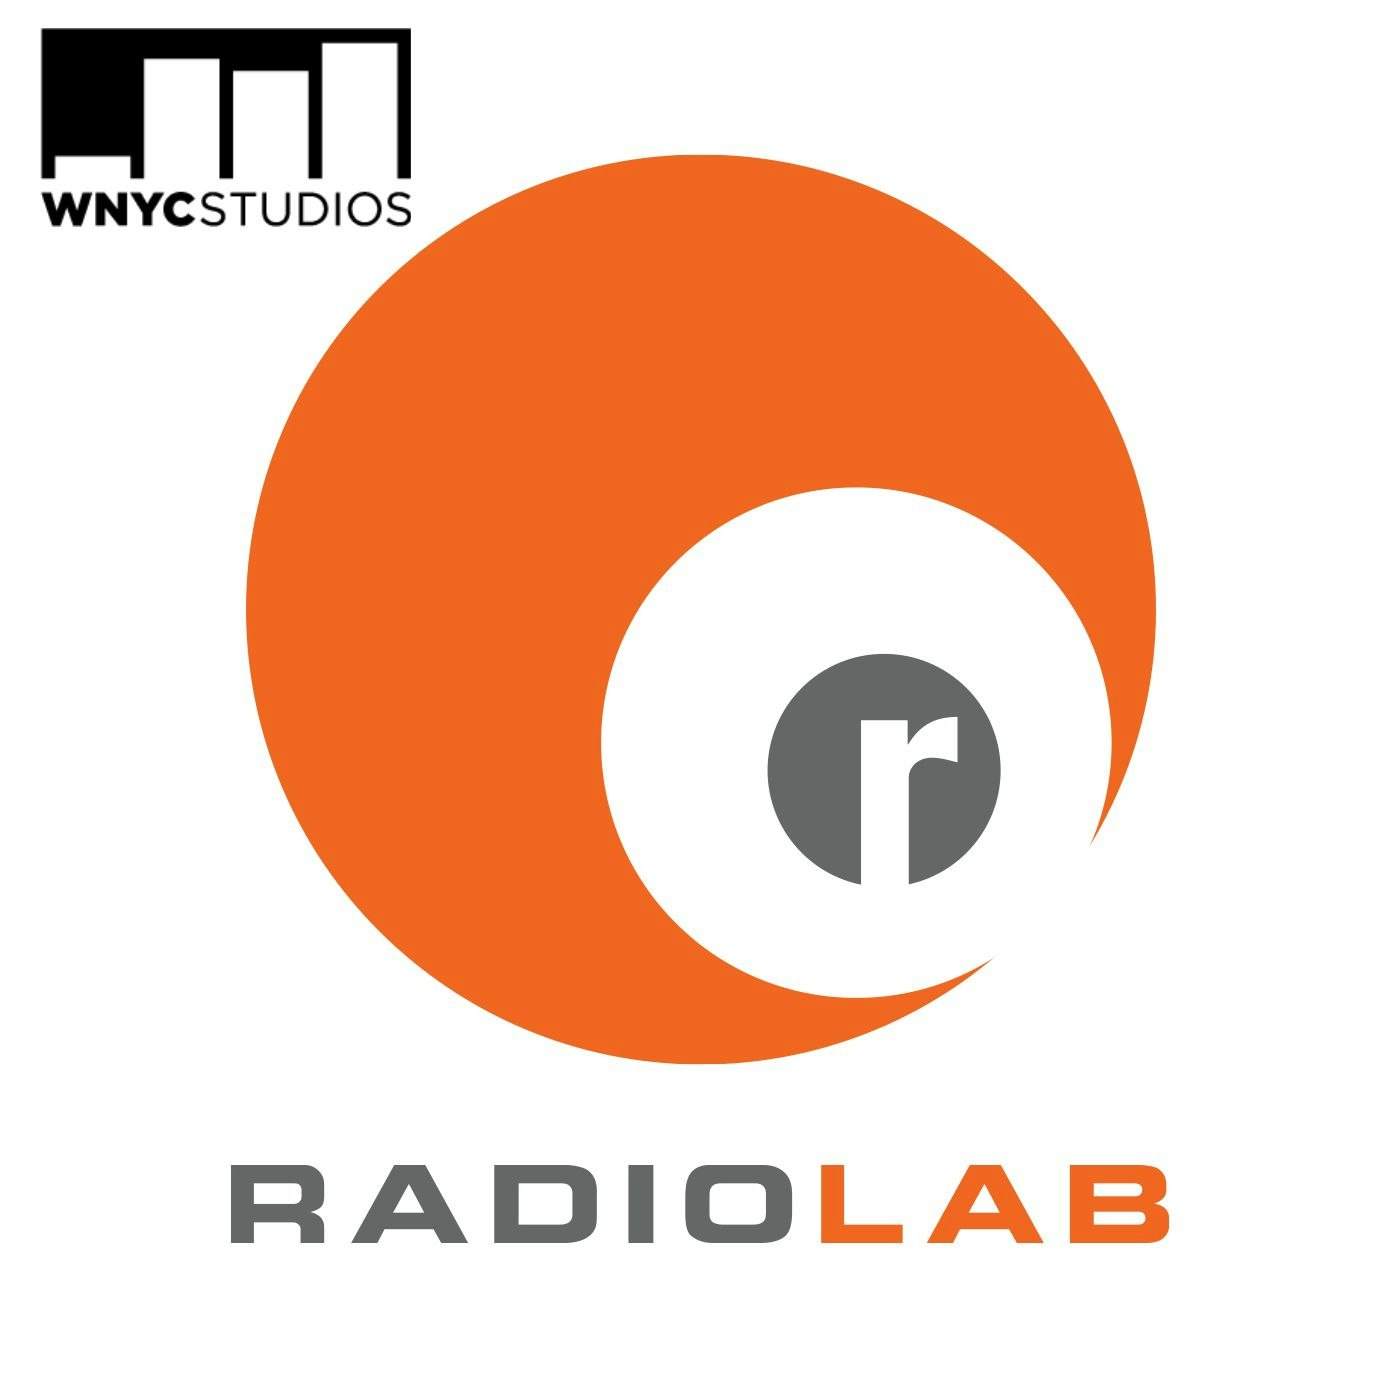 Radiolab - I Don't Have To Answer That